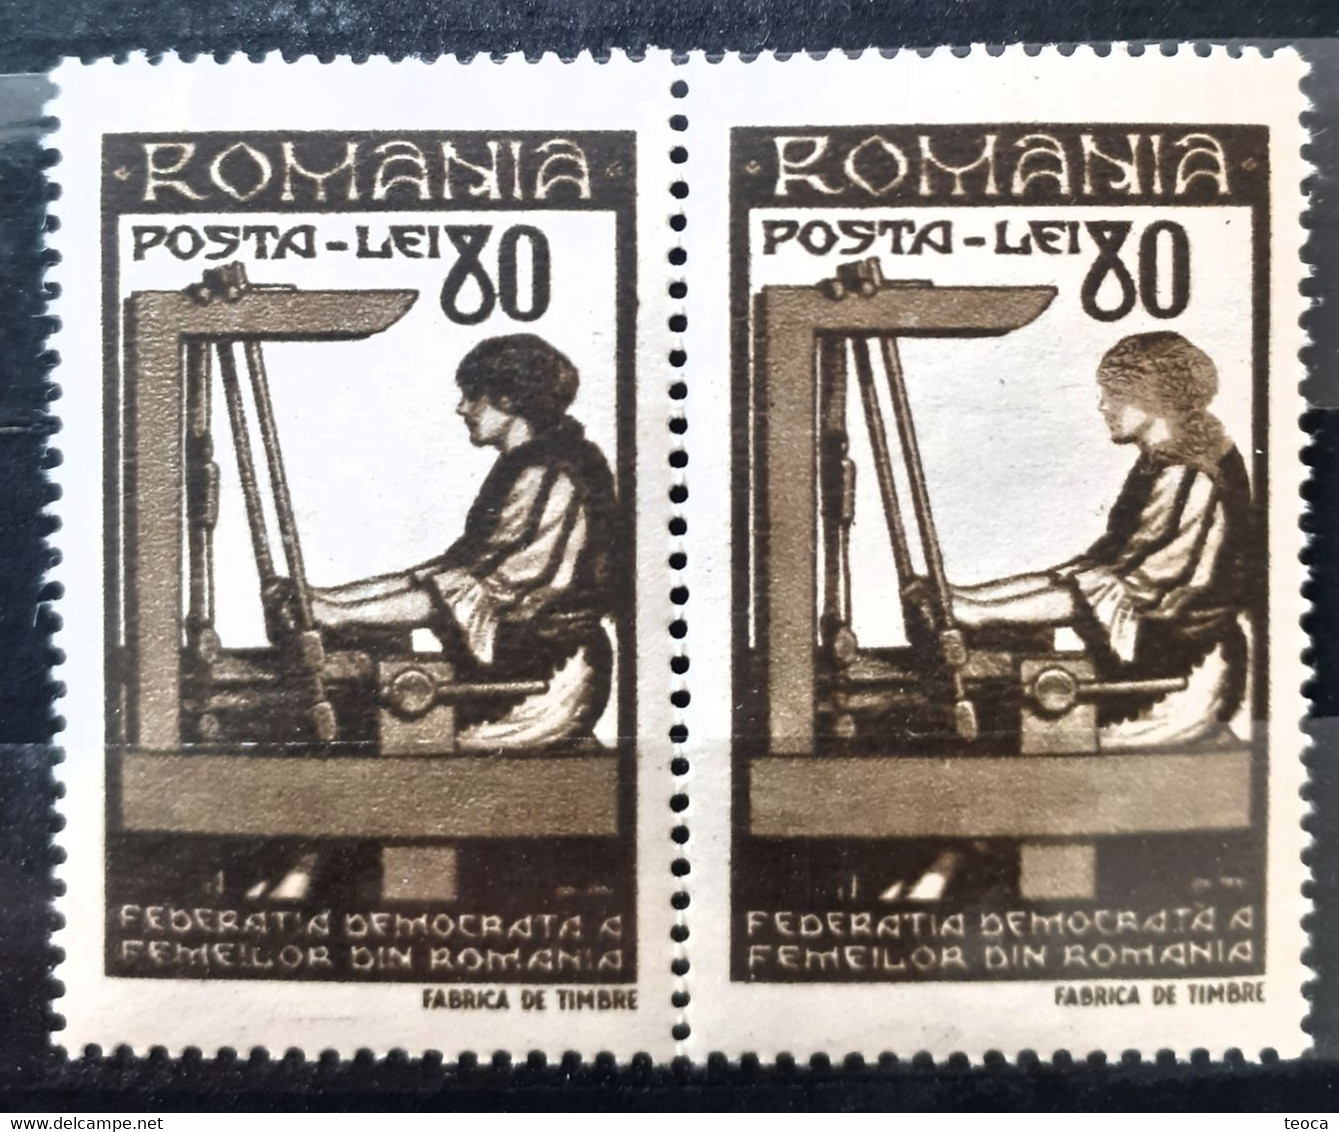 Stamps errors Romania 1947 Mi 1013 with printed  different color the weaver's head , pair mnh